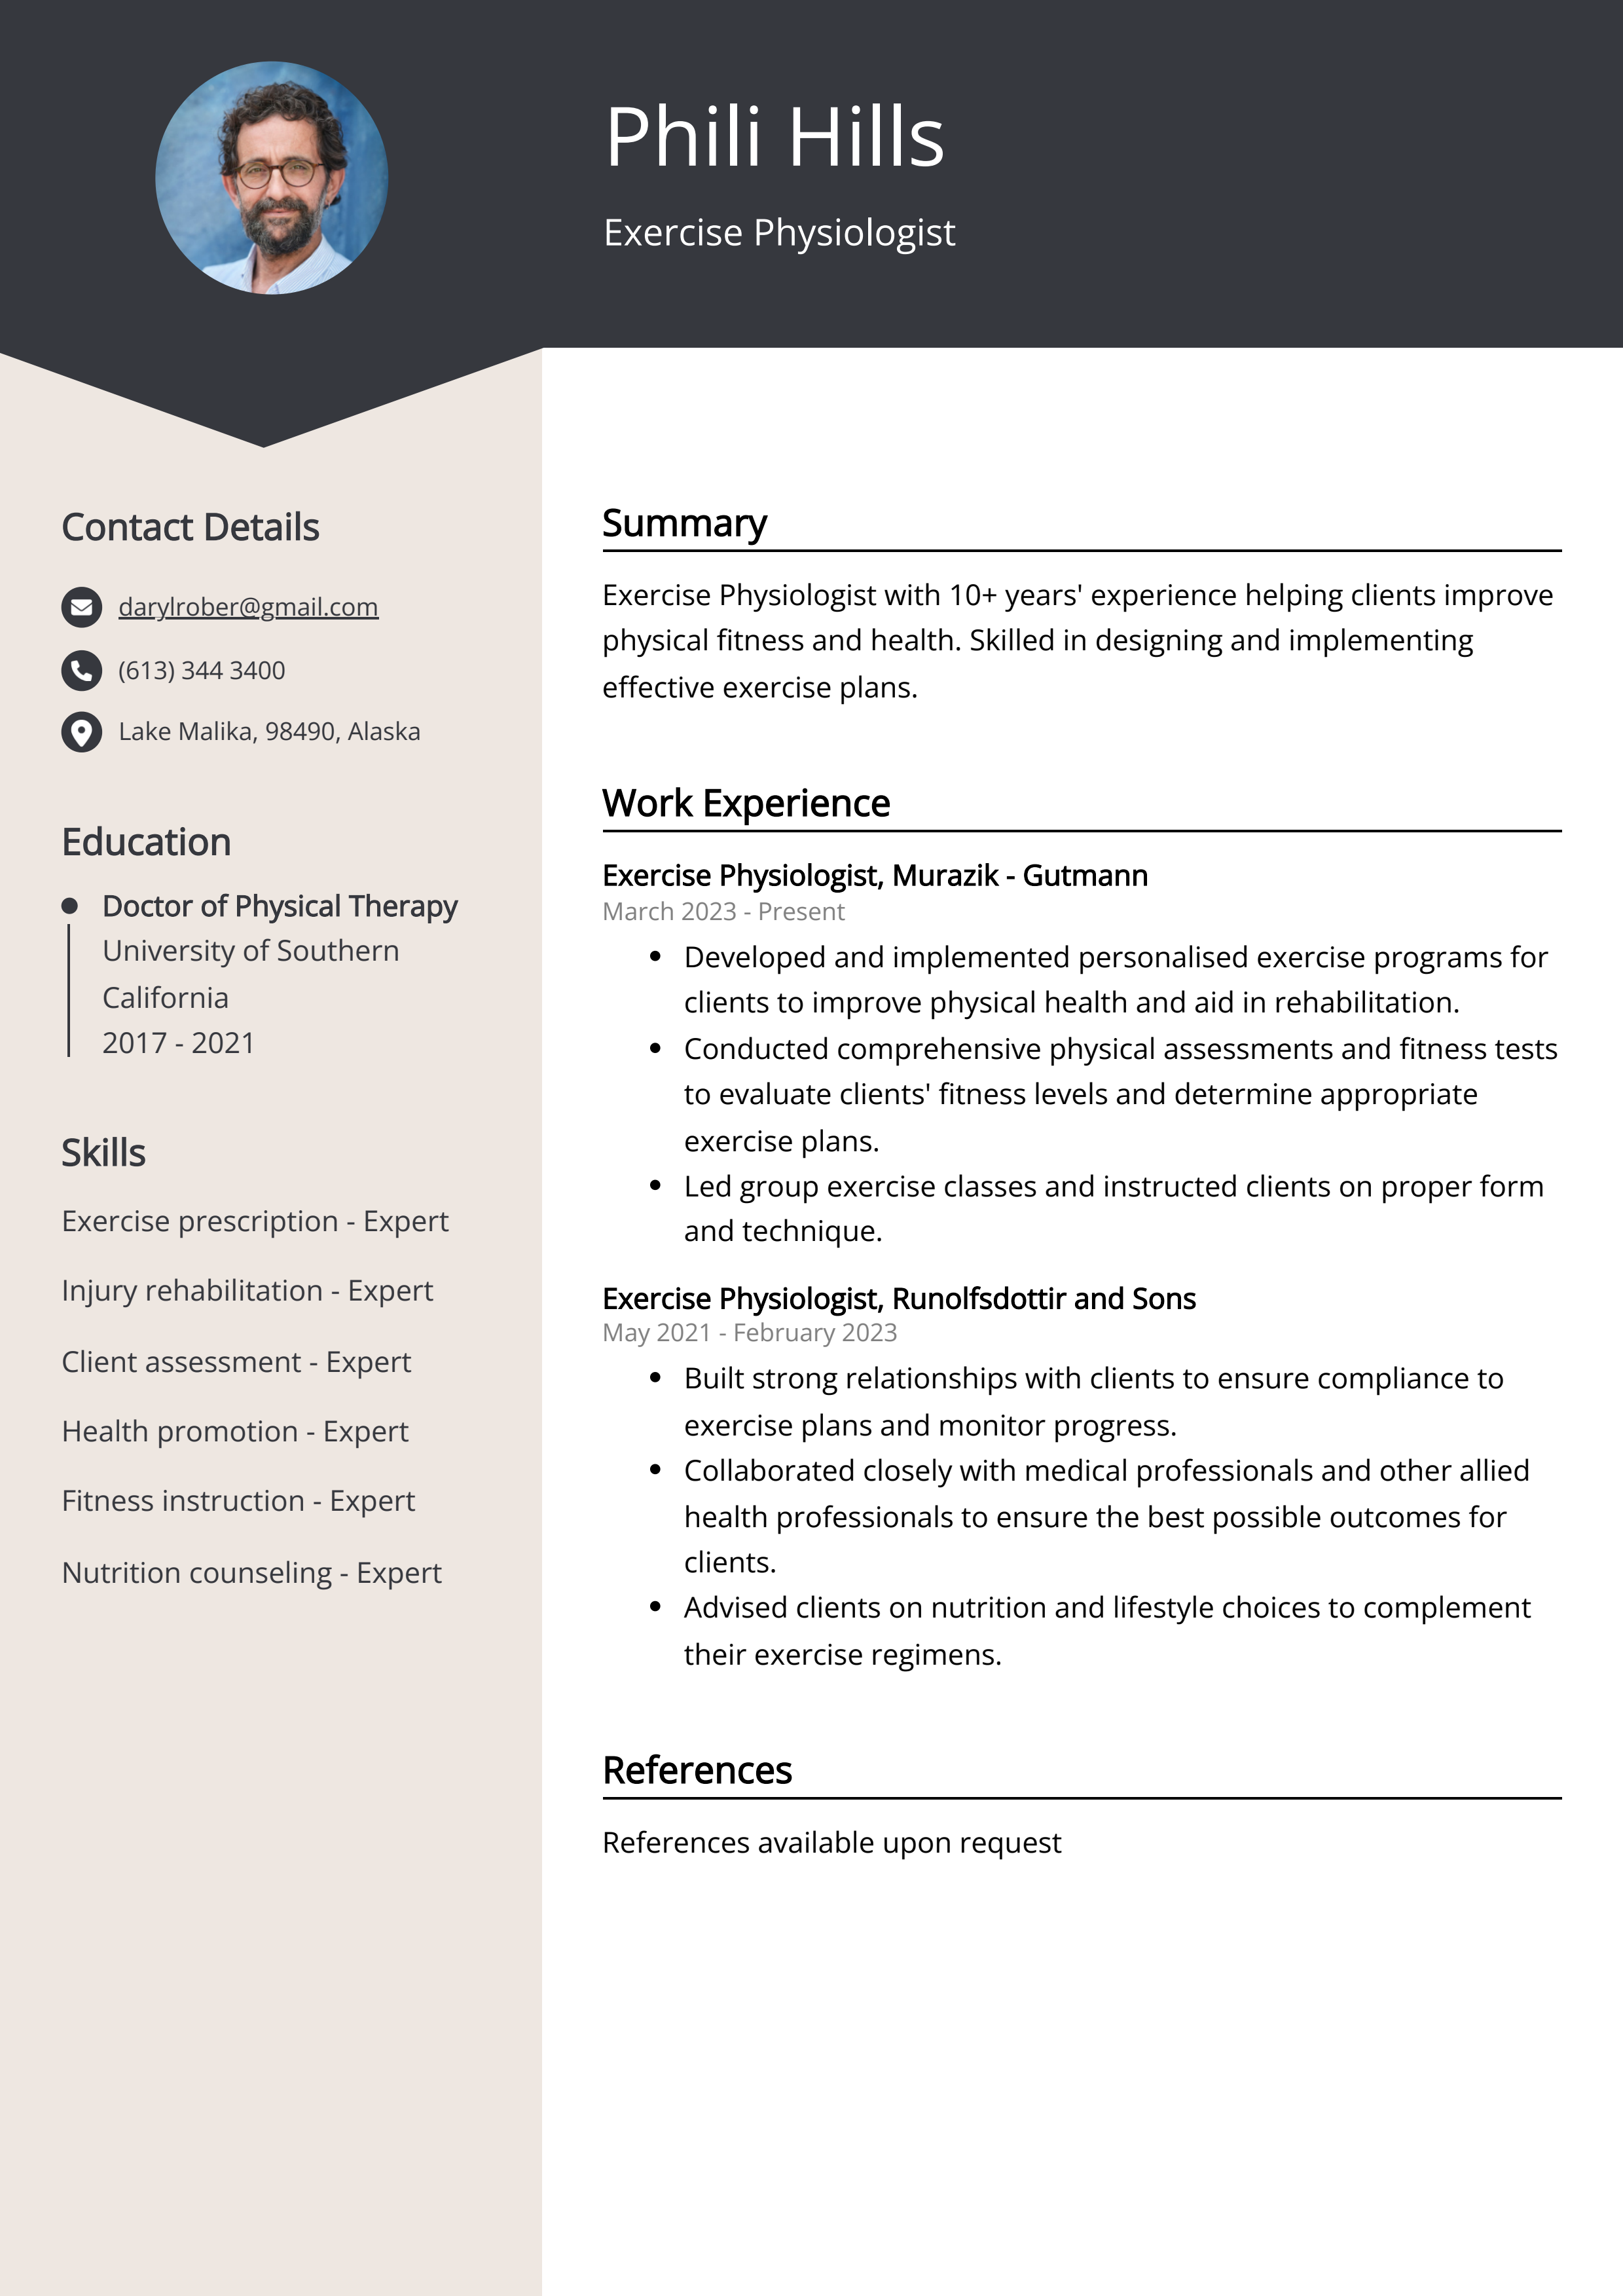 Exercise Physiologist CV Example